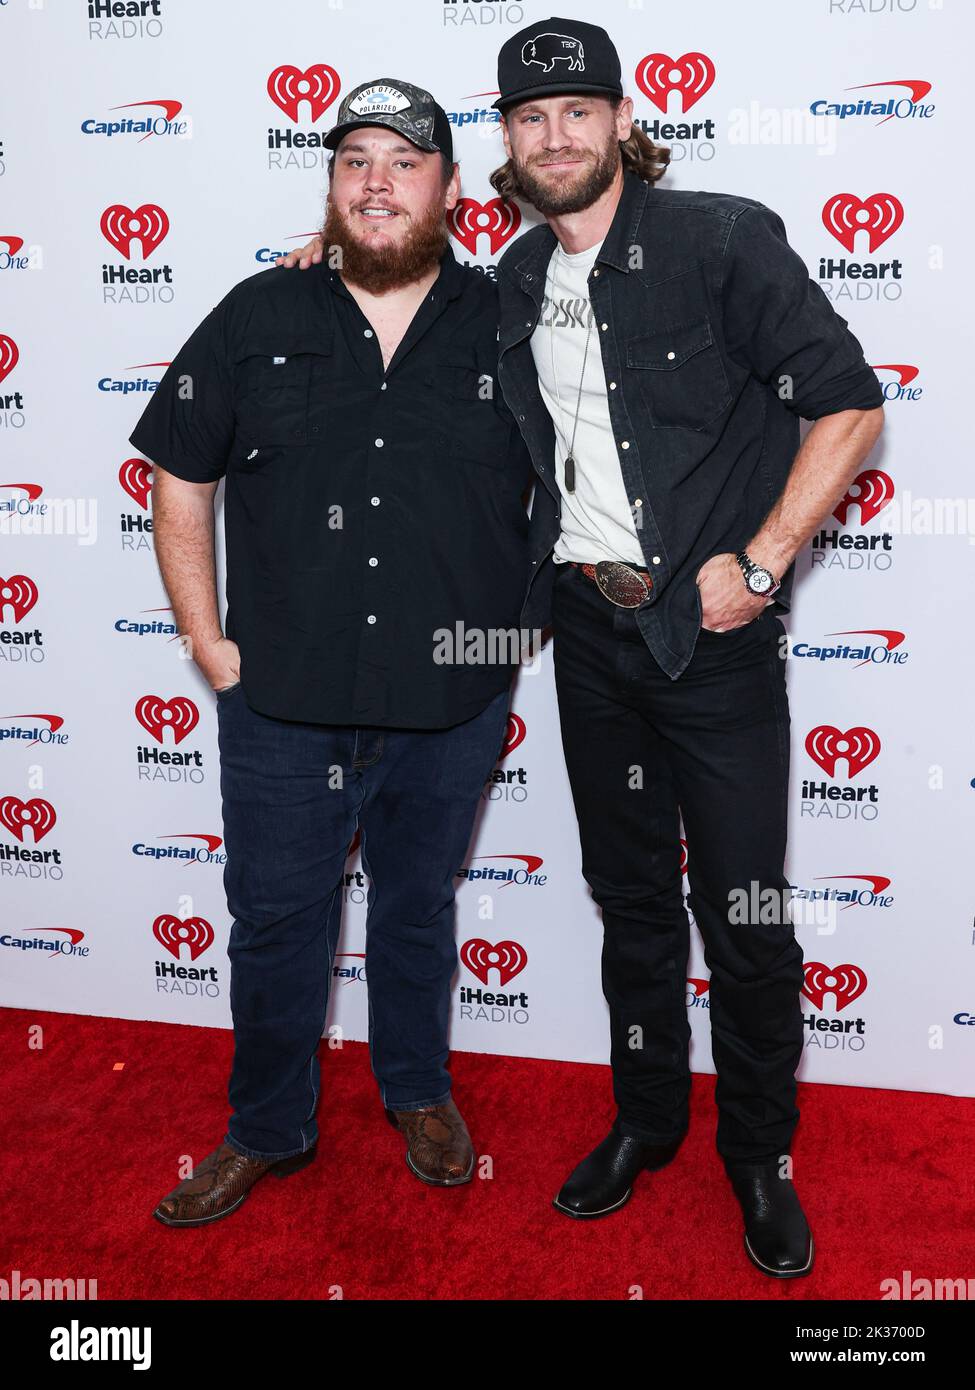 LAS VEGAS, NEVADA, USA - SEPTEMBER 24: Luke Combs and Chase Rice pose in the press room at the 2022 iHeartRadio Music Festival - Night 2 held at the T-Mobile Arena on September 24, 2022 in Las Vegas, Nevada, United States. (Photo by Xavier Collin/Image Press Agency) Stock Photo